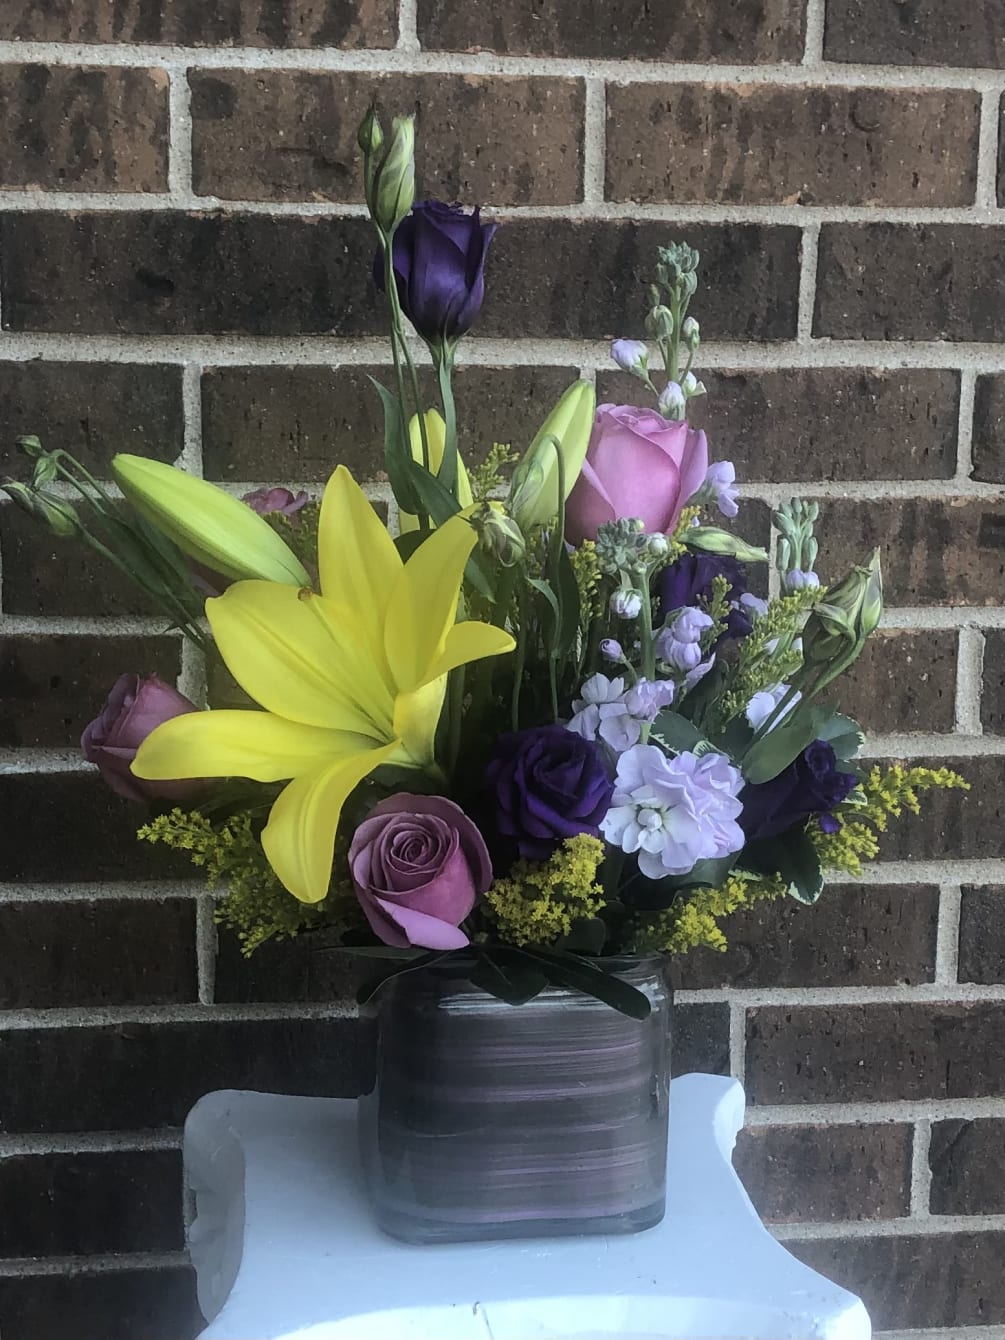 Yellow lily, lavender roses and stock, lisianthus and solidago in a vase.